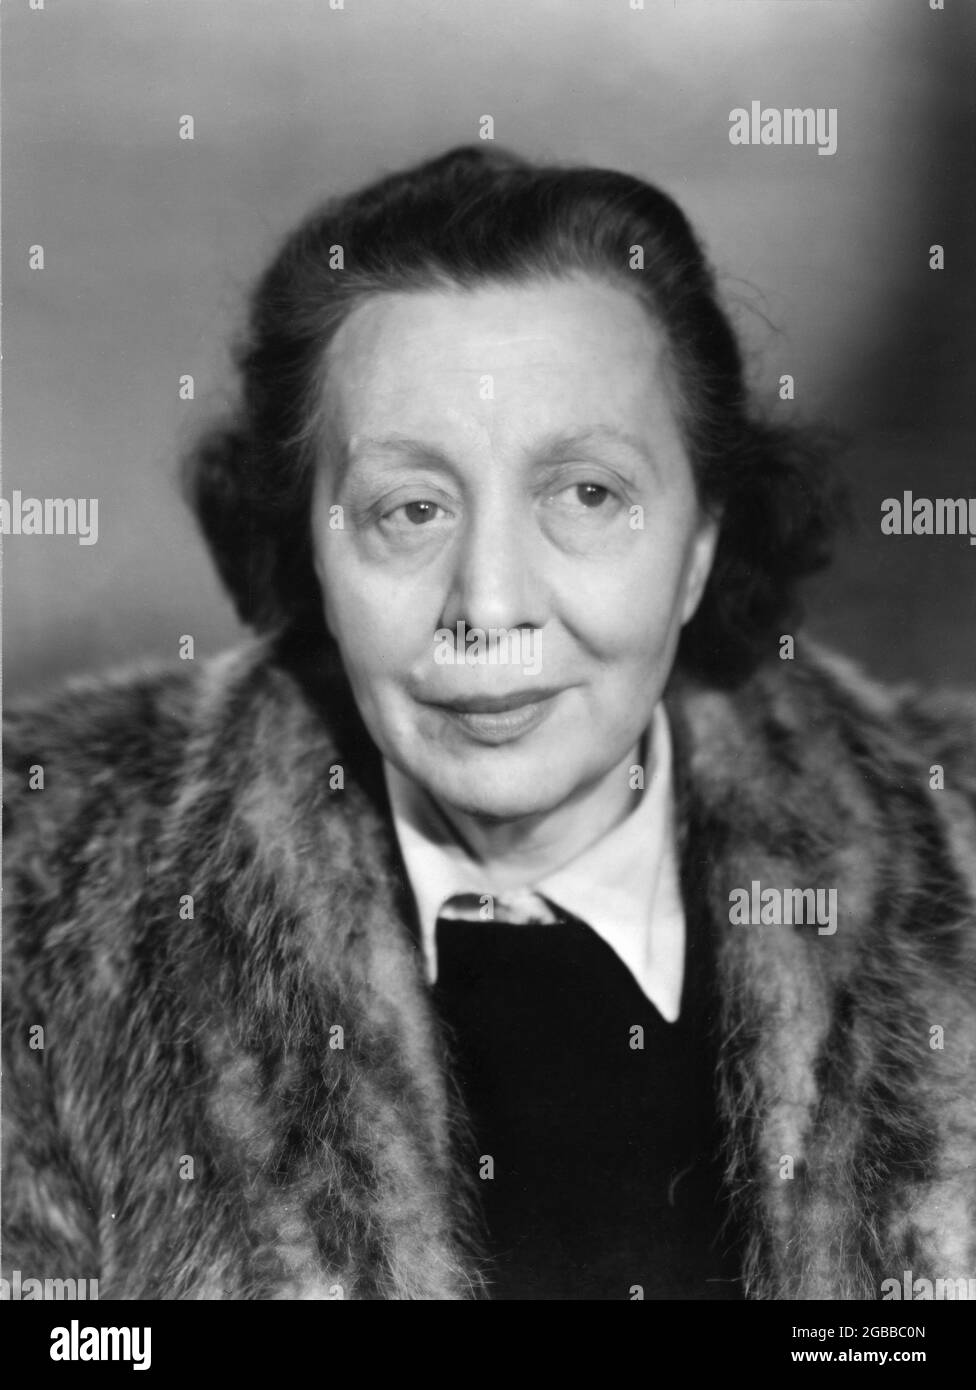 Dame EDITH EVANS before make-up as the Old Countess publicity portrait for THE QUEEN OF SPADES 1949 director THOROLD DICKINSON short story Alexander Pushkin screenplay Rodney Ackland and Arthur Boys music Georges Auric make up artist Bob Clark costumer Oliver Messel De Grunwald Productions for Associated British Picture Corporation Stock Photo